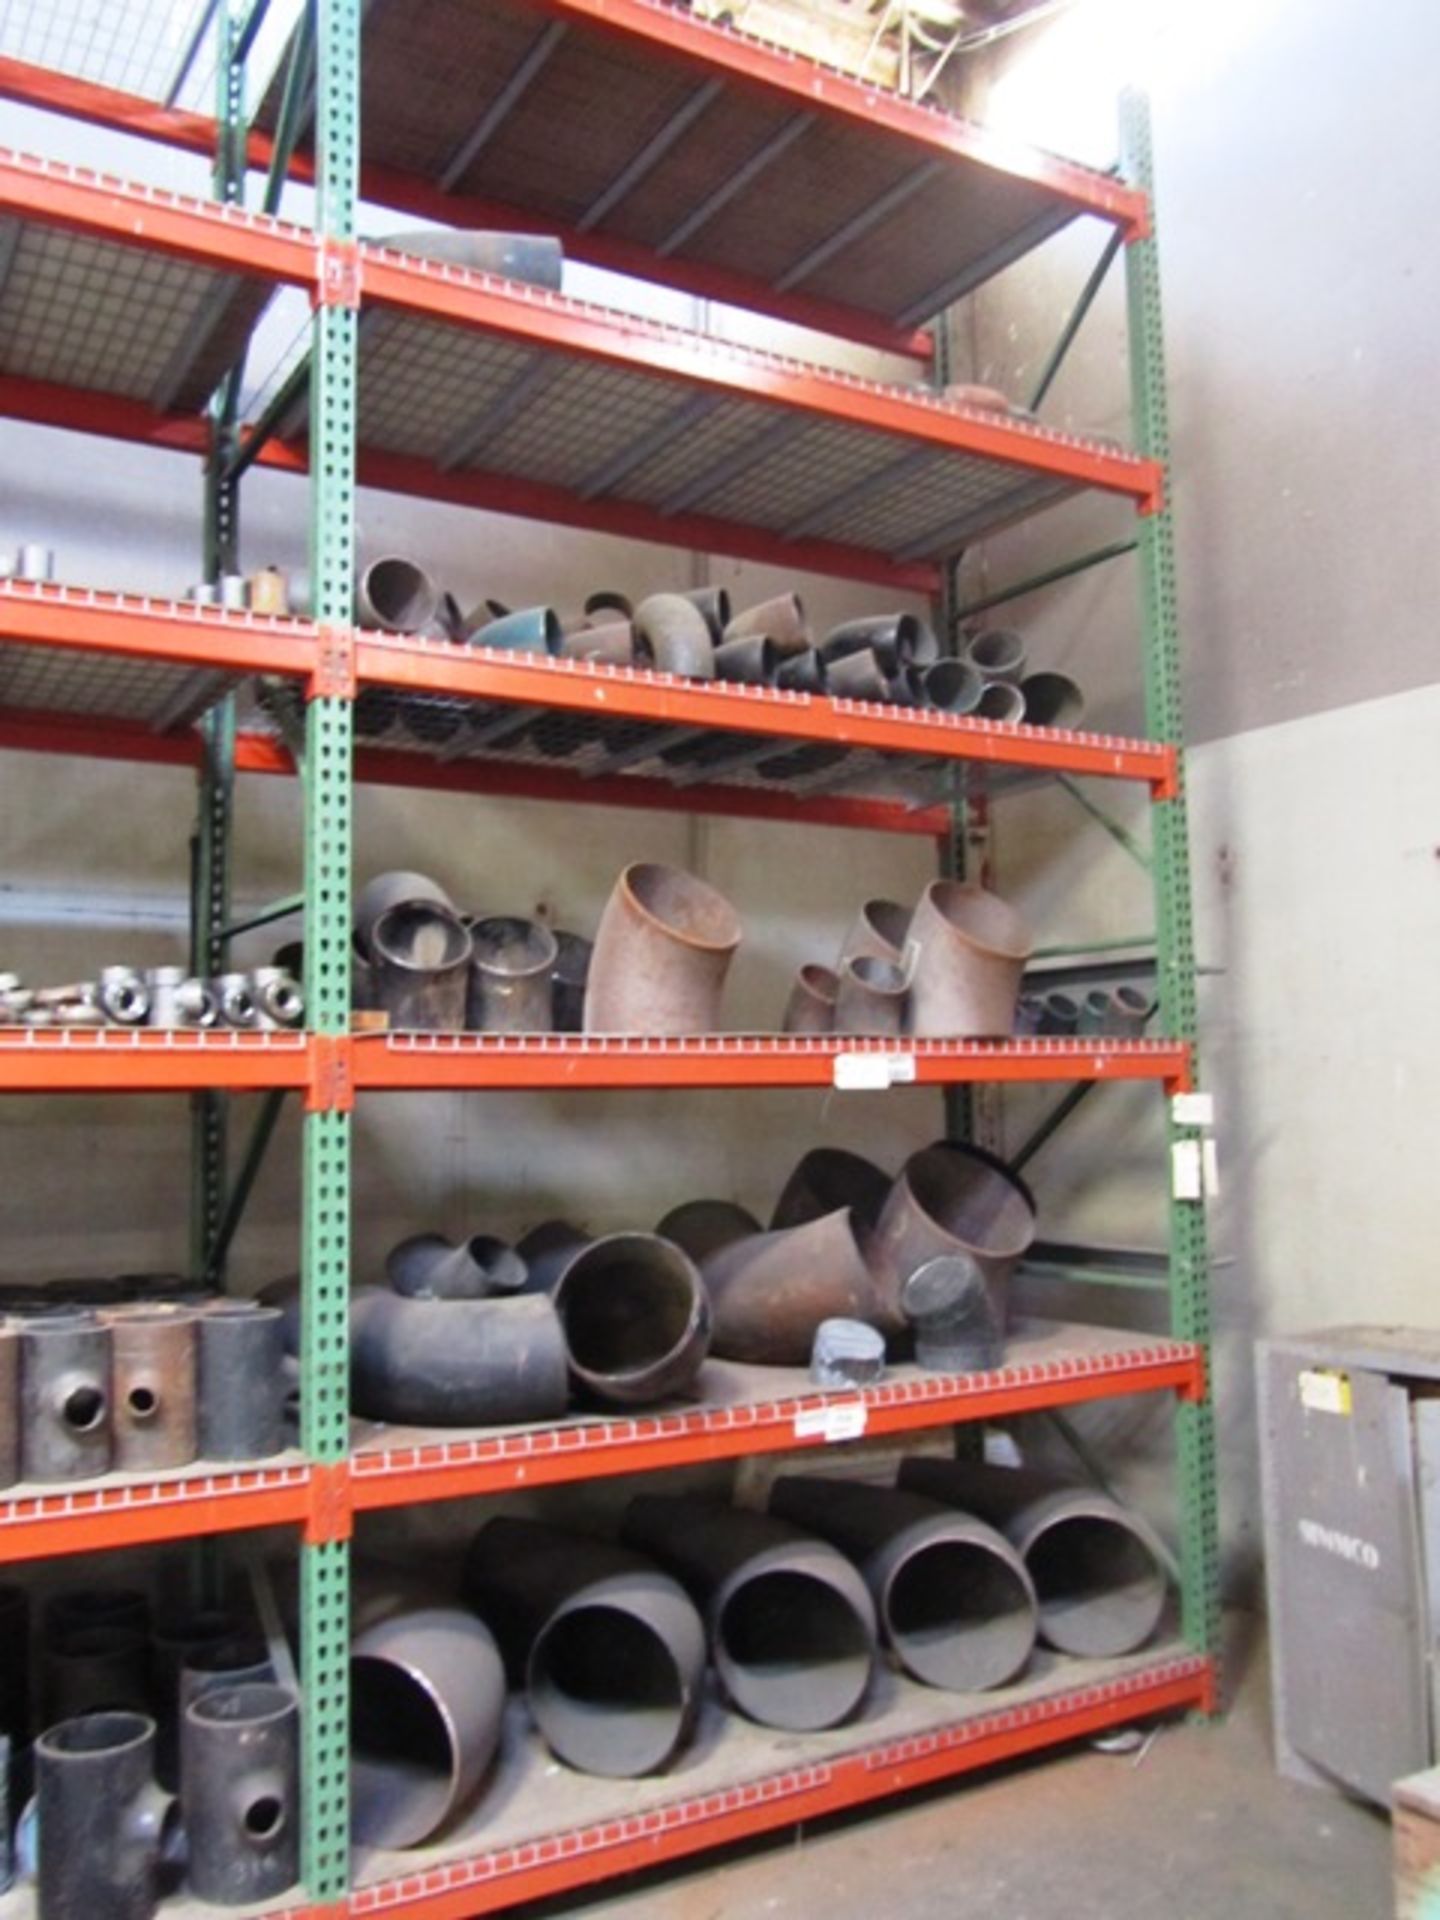 Contents of 6 Vertical Sections Pallet Racking consisting of Metal Elbows